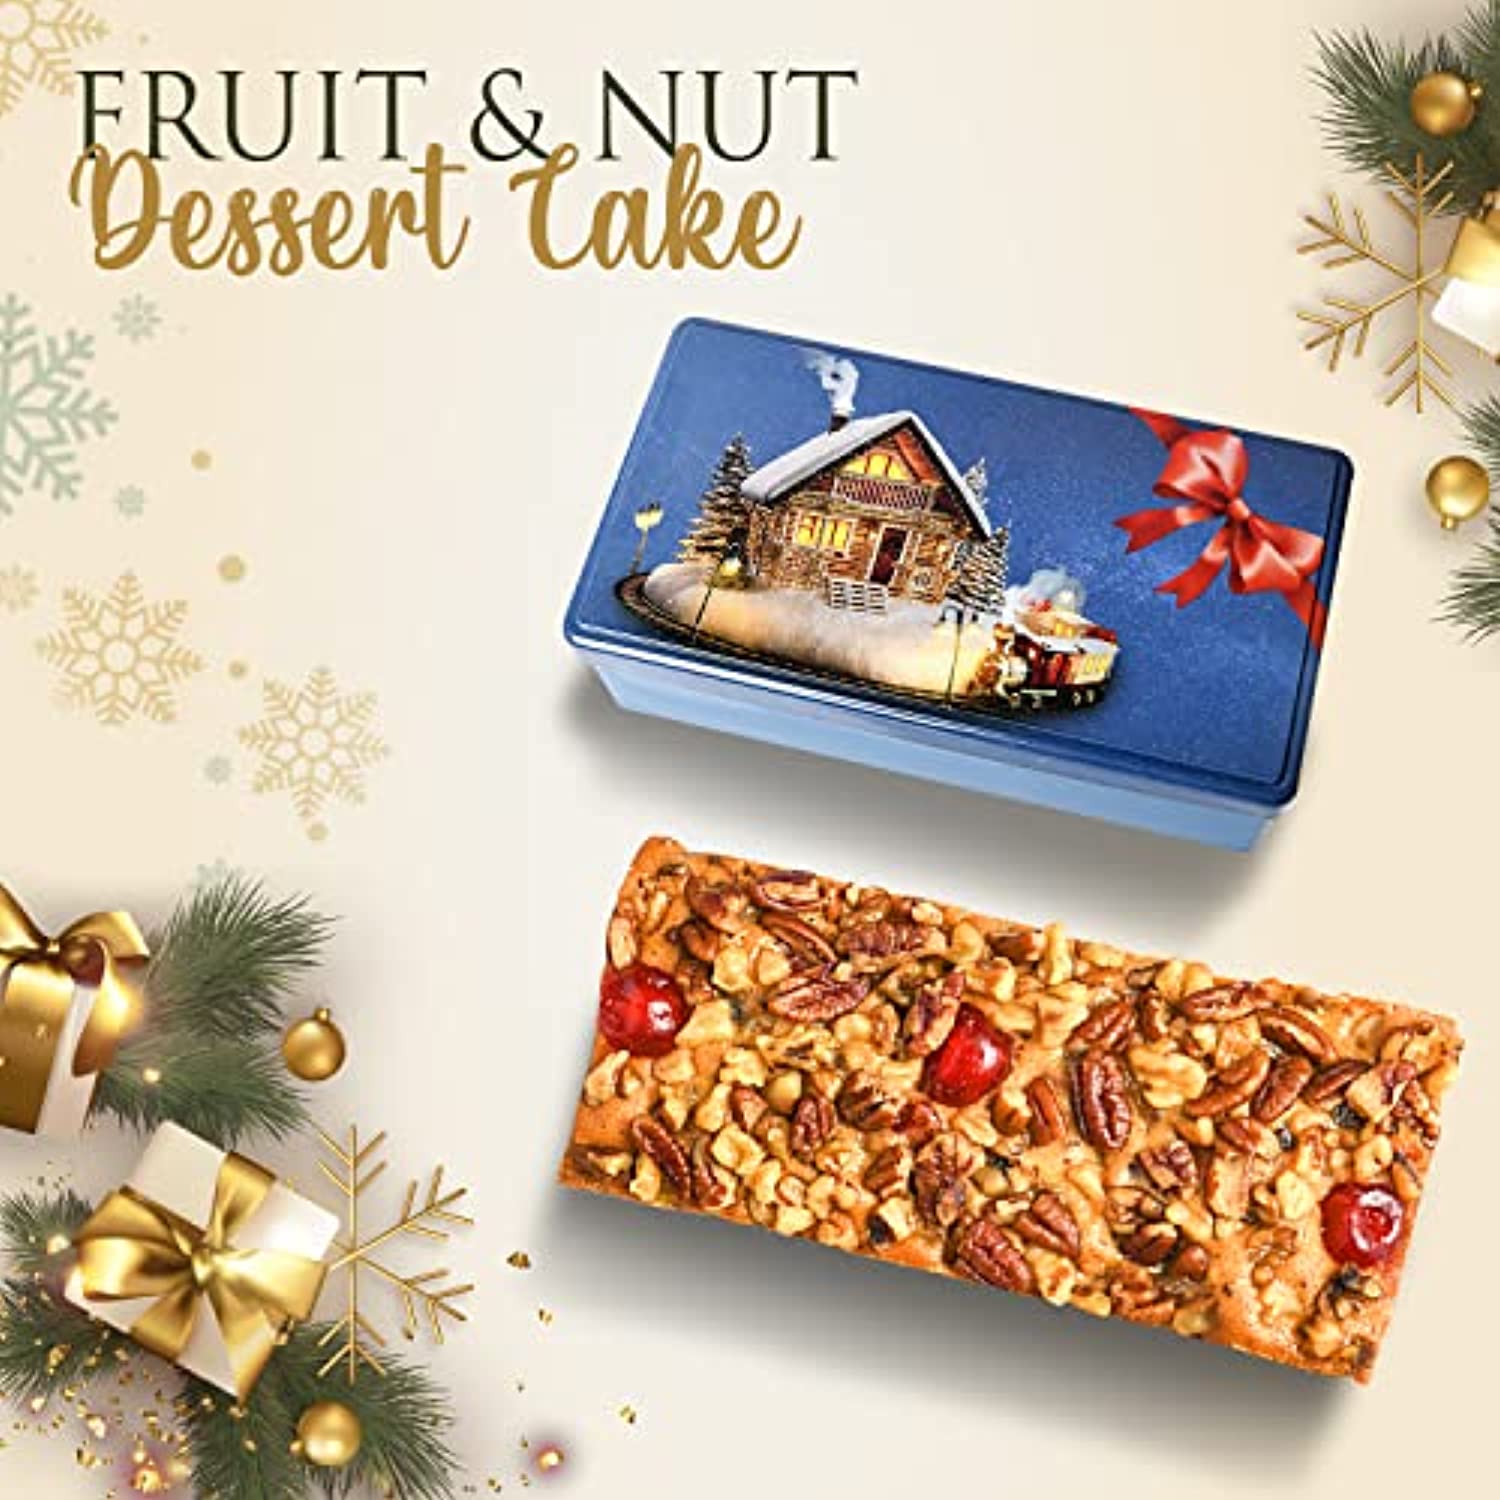 1LB Gourmet Fruit Cake | Filled with Cherries, Pineapple, Pecans, Walnuts, Raisins – Best Fruitcake w/ Festive Tin by Crave Island